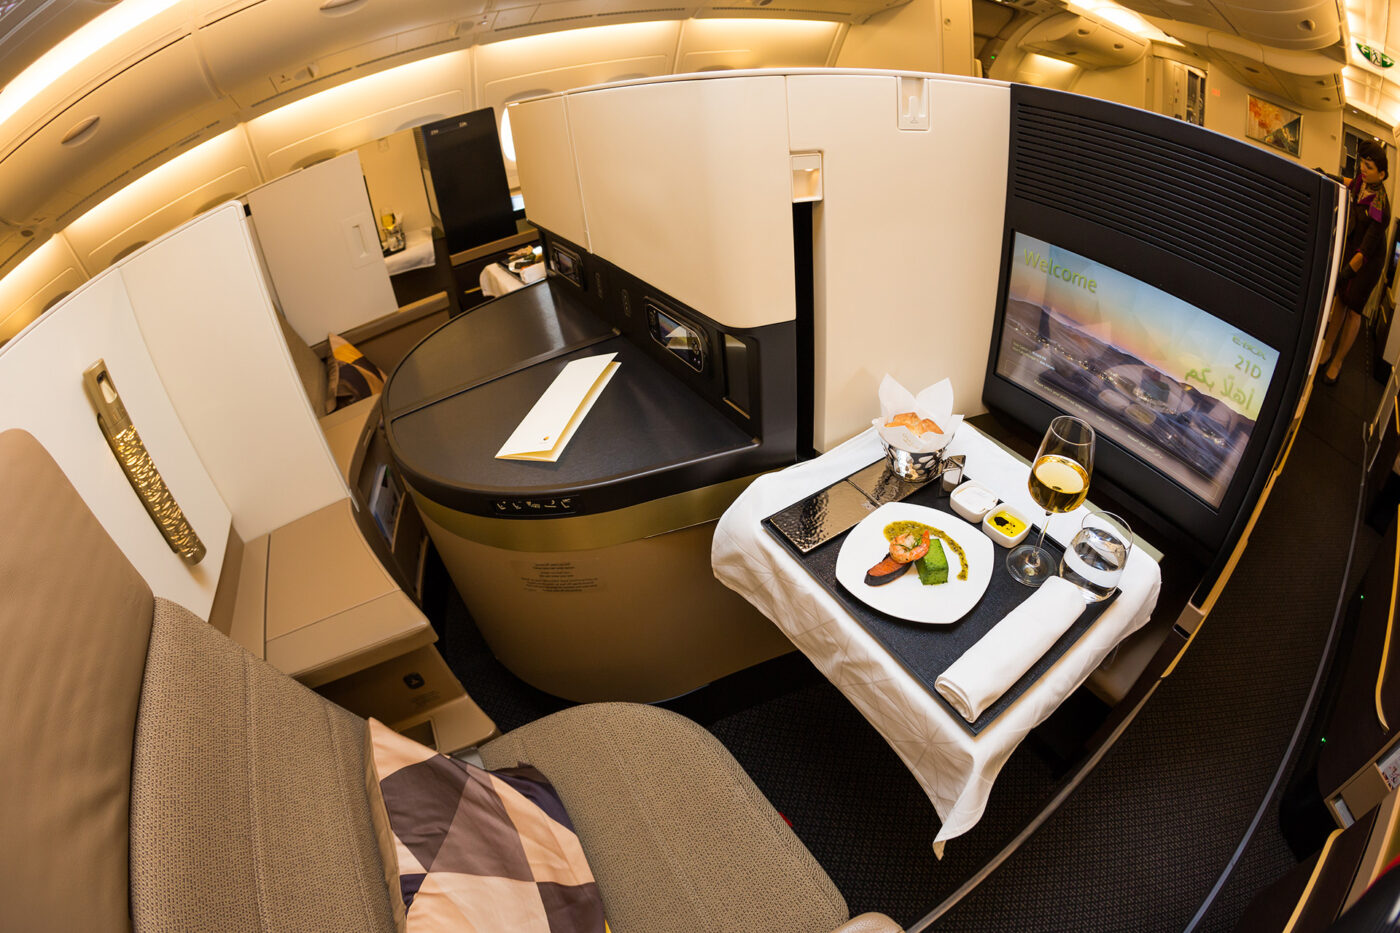 Etihad Airways business class on Airbus A380